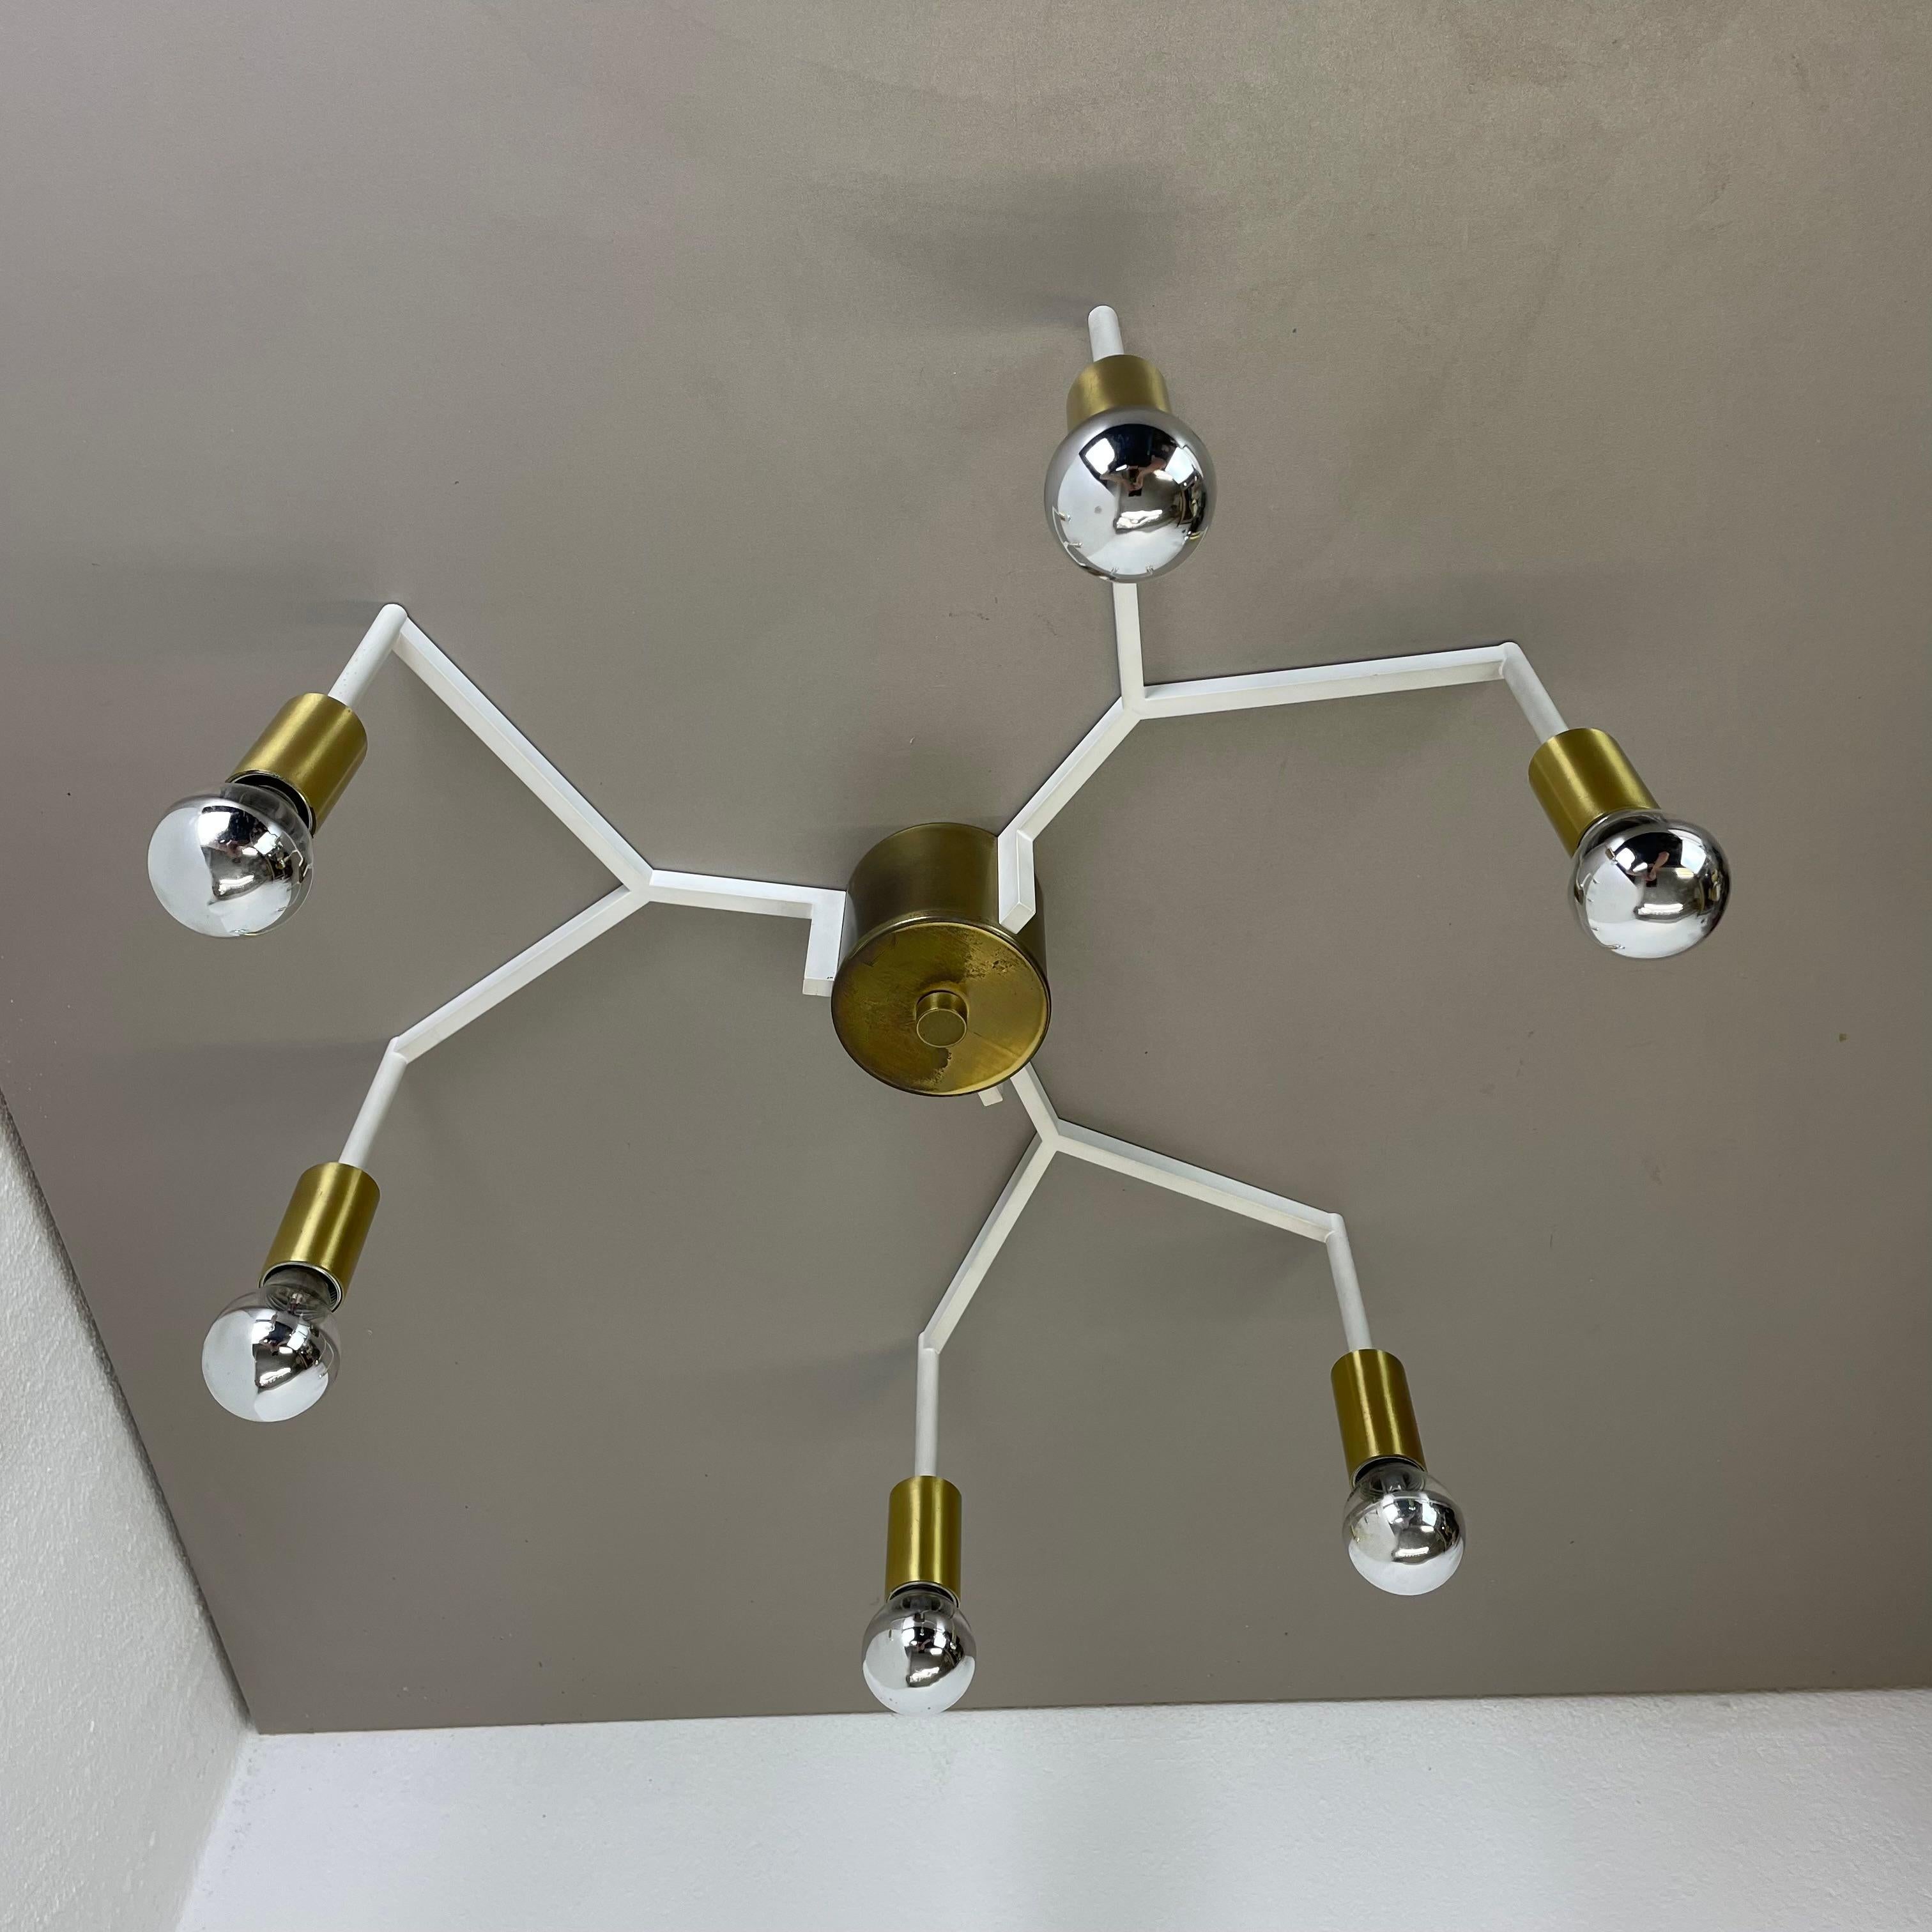 Article:

ceiling light


Producer:

Origin Italy 

in the manner of Stilnovo, Gio Ponti



Age:

1970s



This modernist light was produced in Italy in the 1960s. Minimalist space age design in cubic atomic form. It is made from solid brass and